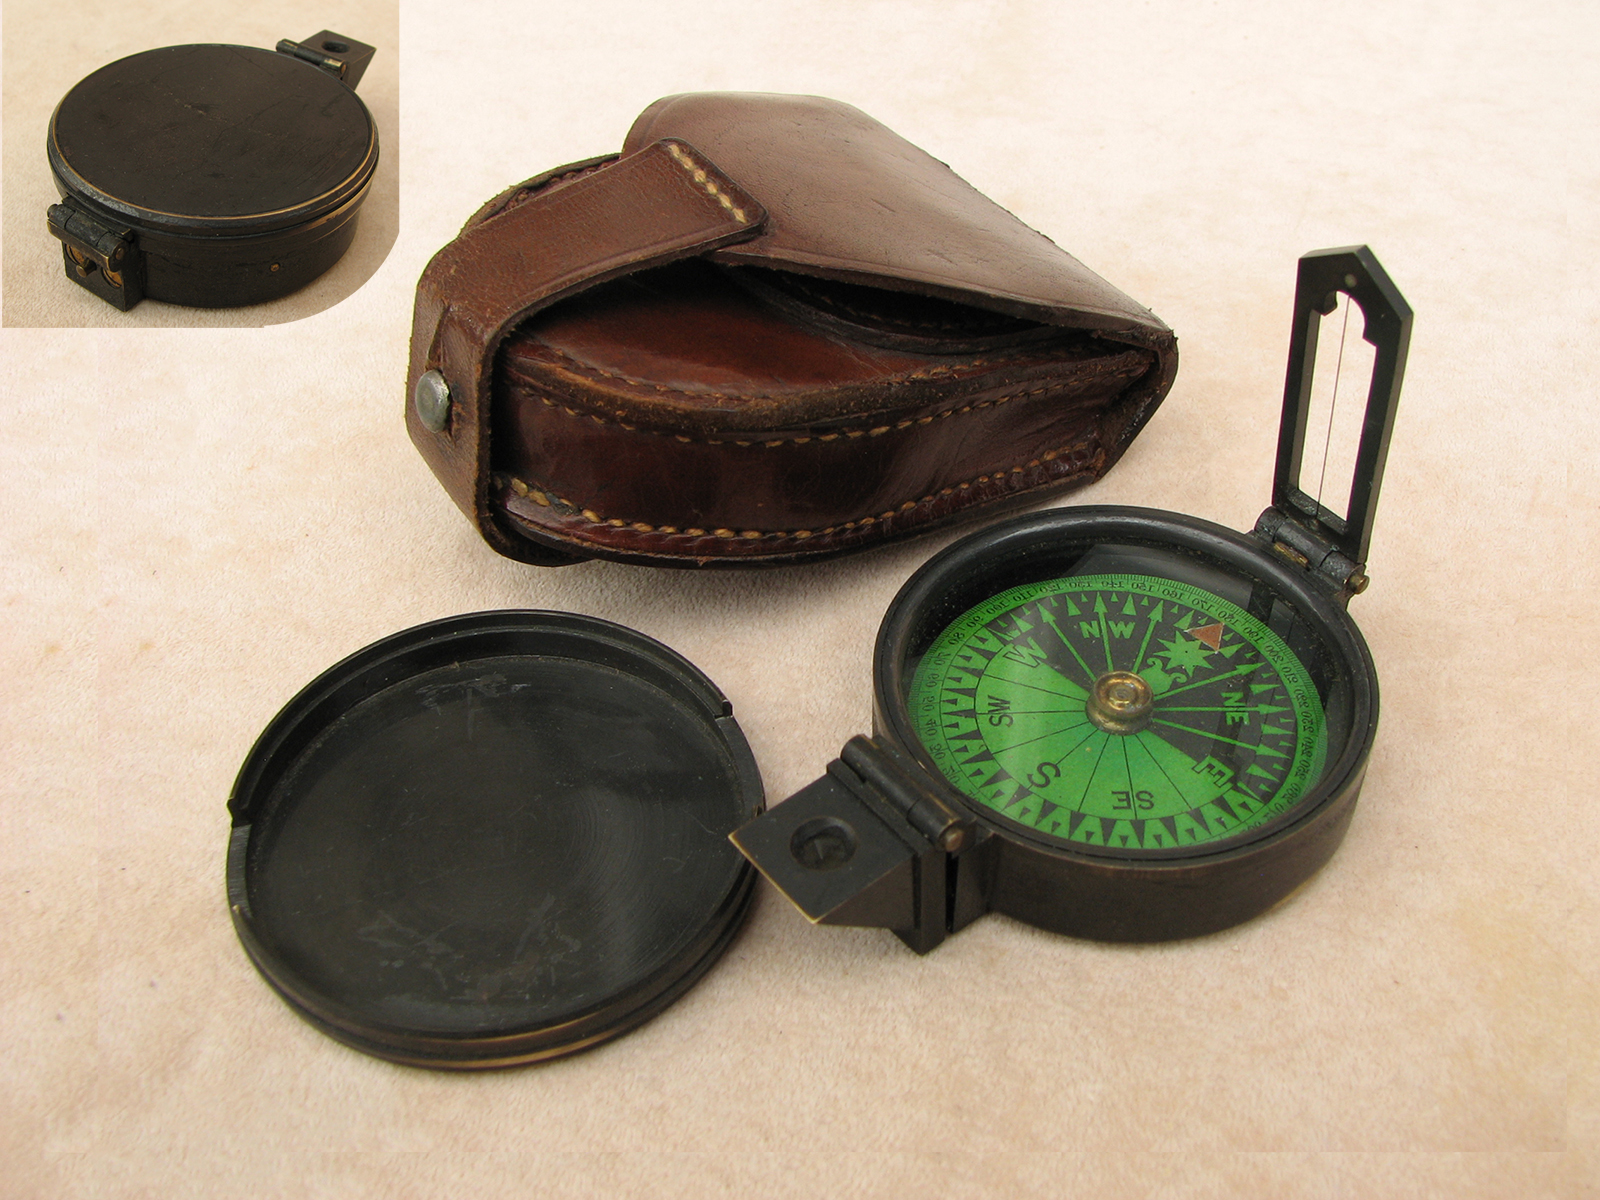 Rare prismatic compass with Singers Patent green card dial